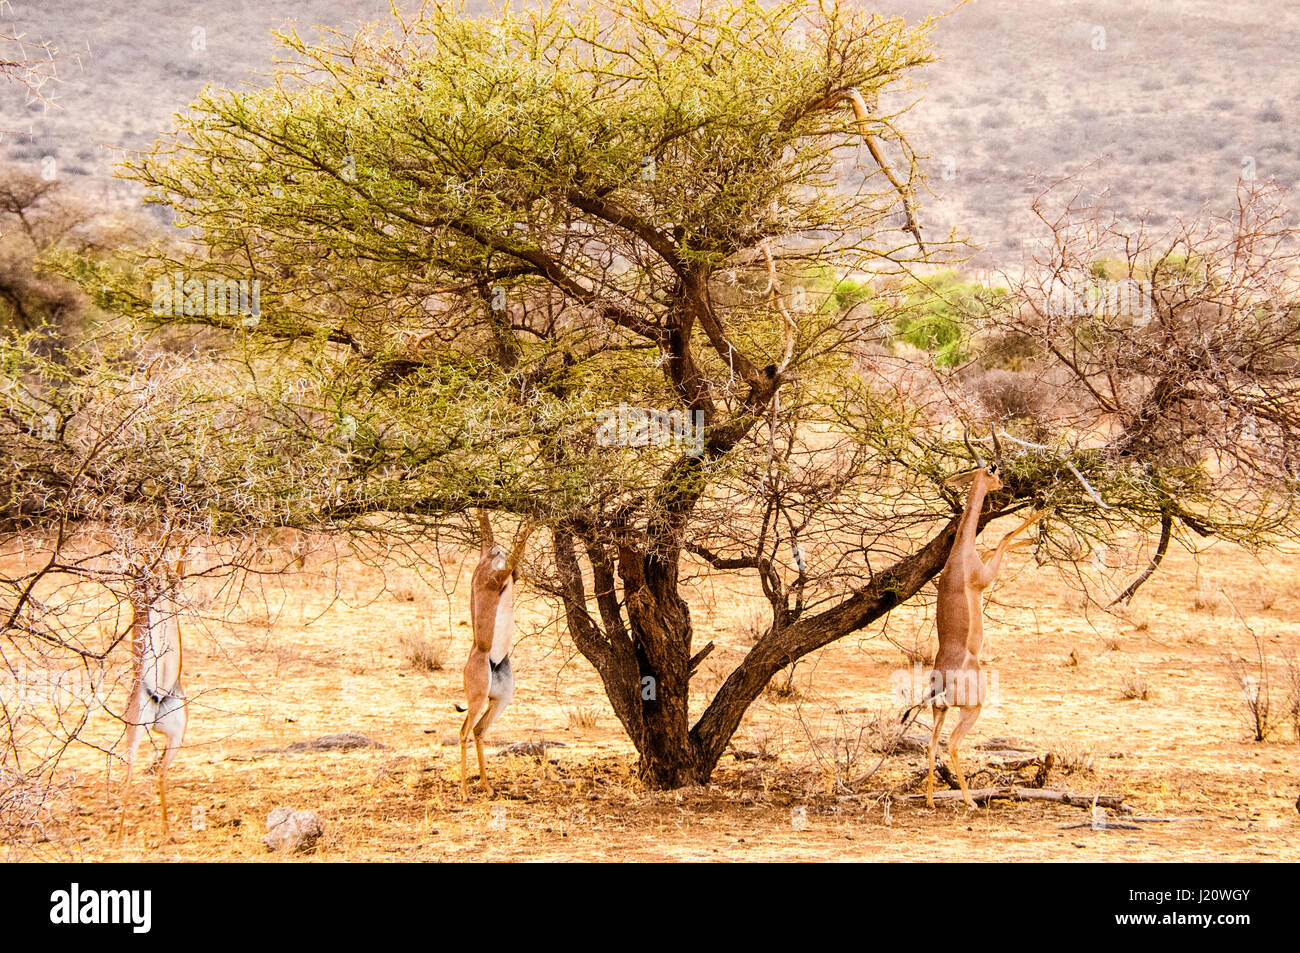 Three wild African Gerenuks,Litocranius walleri, browsing, eating from a tree in the Buffalo Springs Game Reserve, Kenya, East Africa Stock Photo